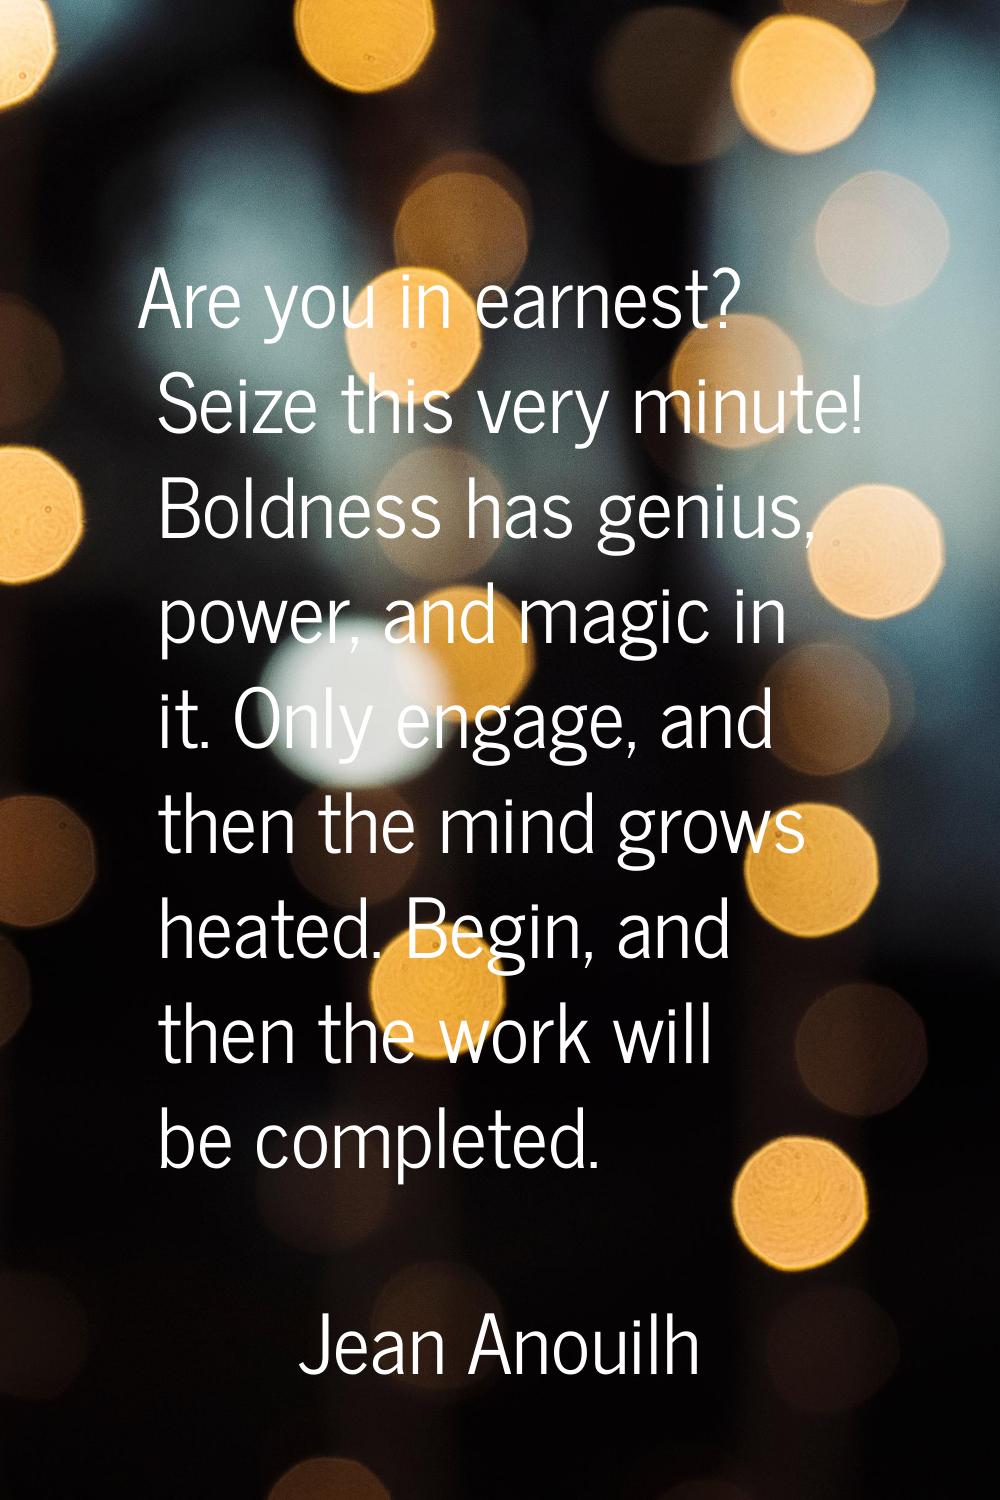 Are you in earnest? Seize this very minute! Boldness has genius, power, and magic in it. Only engag